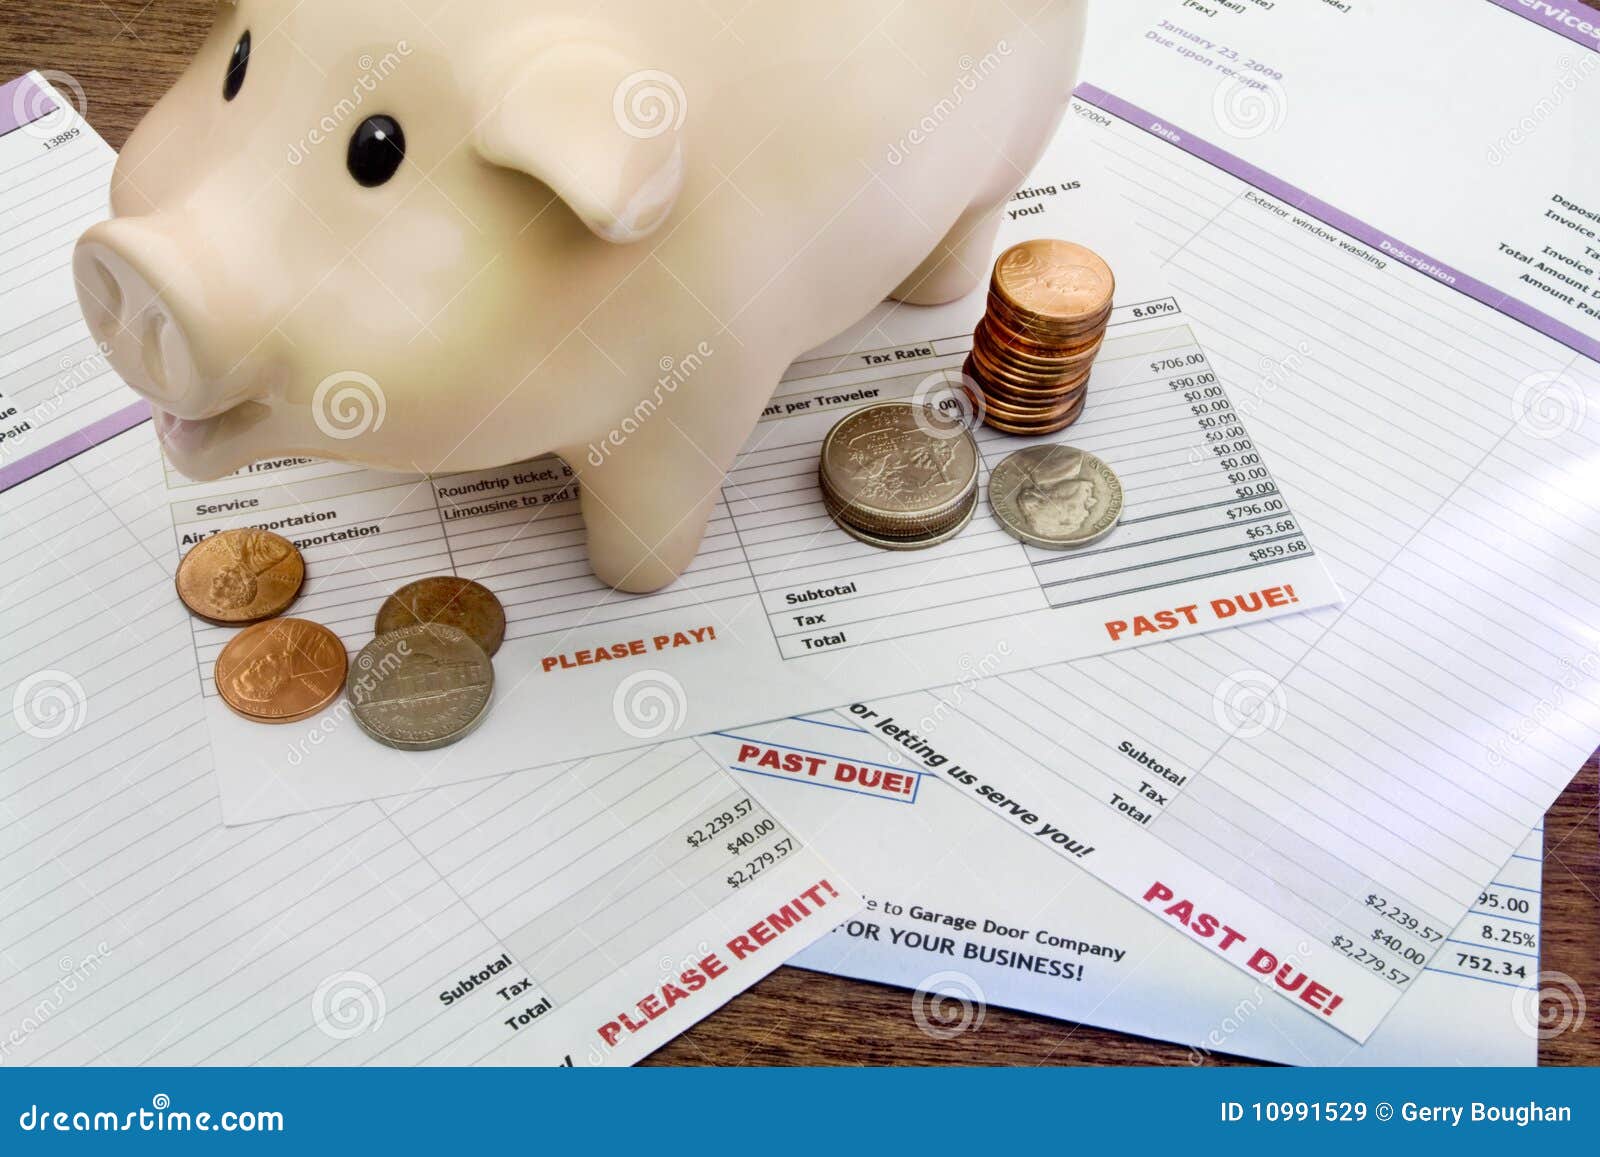 Piggy Bank With Coins And Delinquent Bills. Stock Image ...